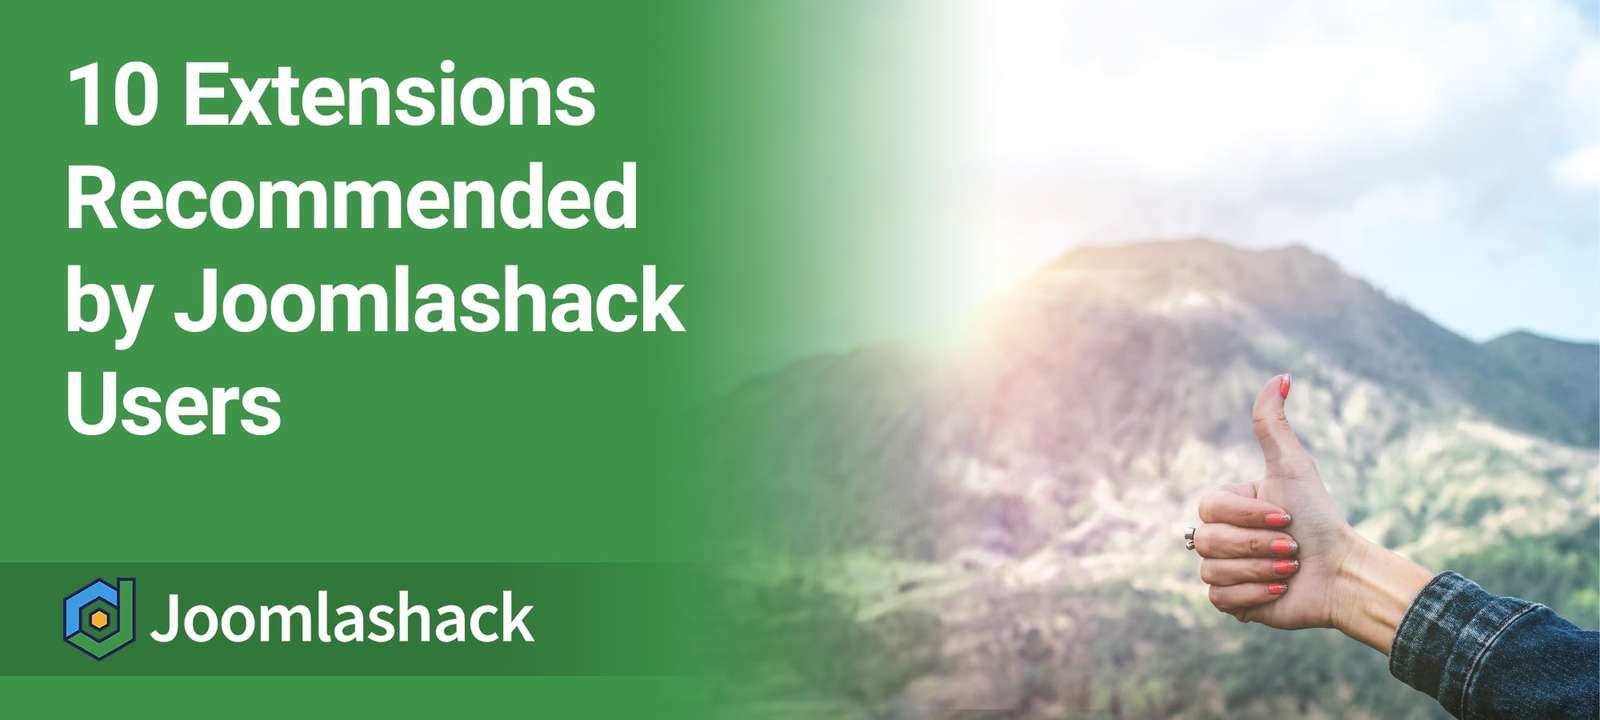 10 Excellent Extensions, Recommended by Joomlashack Users